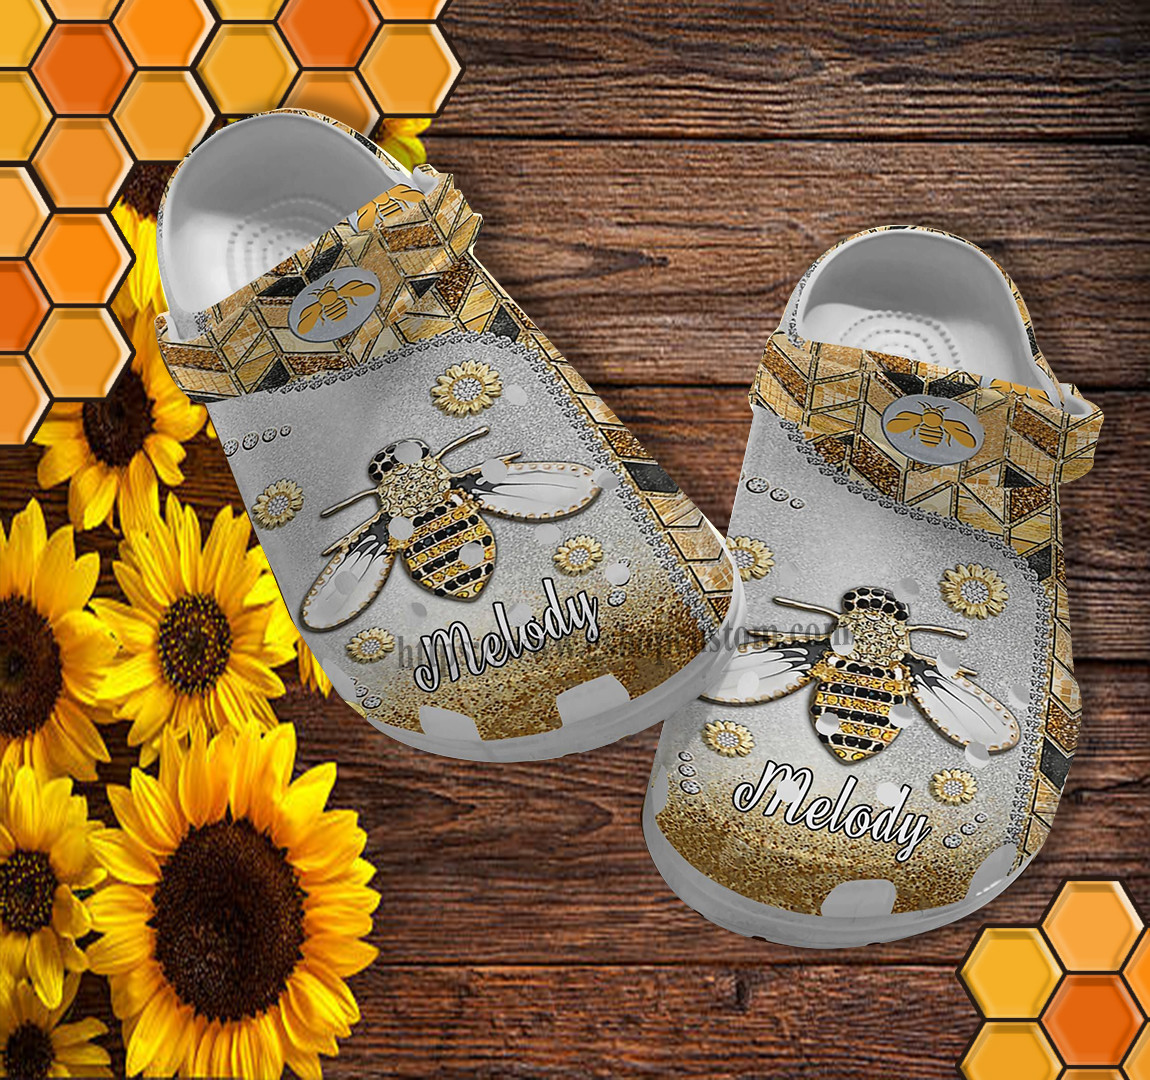 Bee Metal Flower Twinkle Croc Shoes For Women- Bee Kind Hippie Shoes Croc Clogs Birthday Customize- Cr-Ne0354